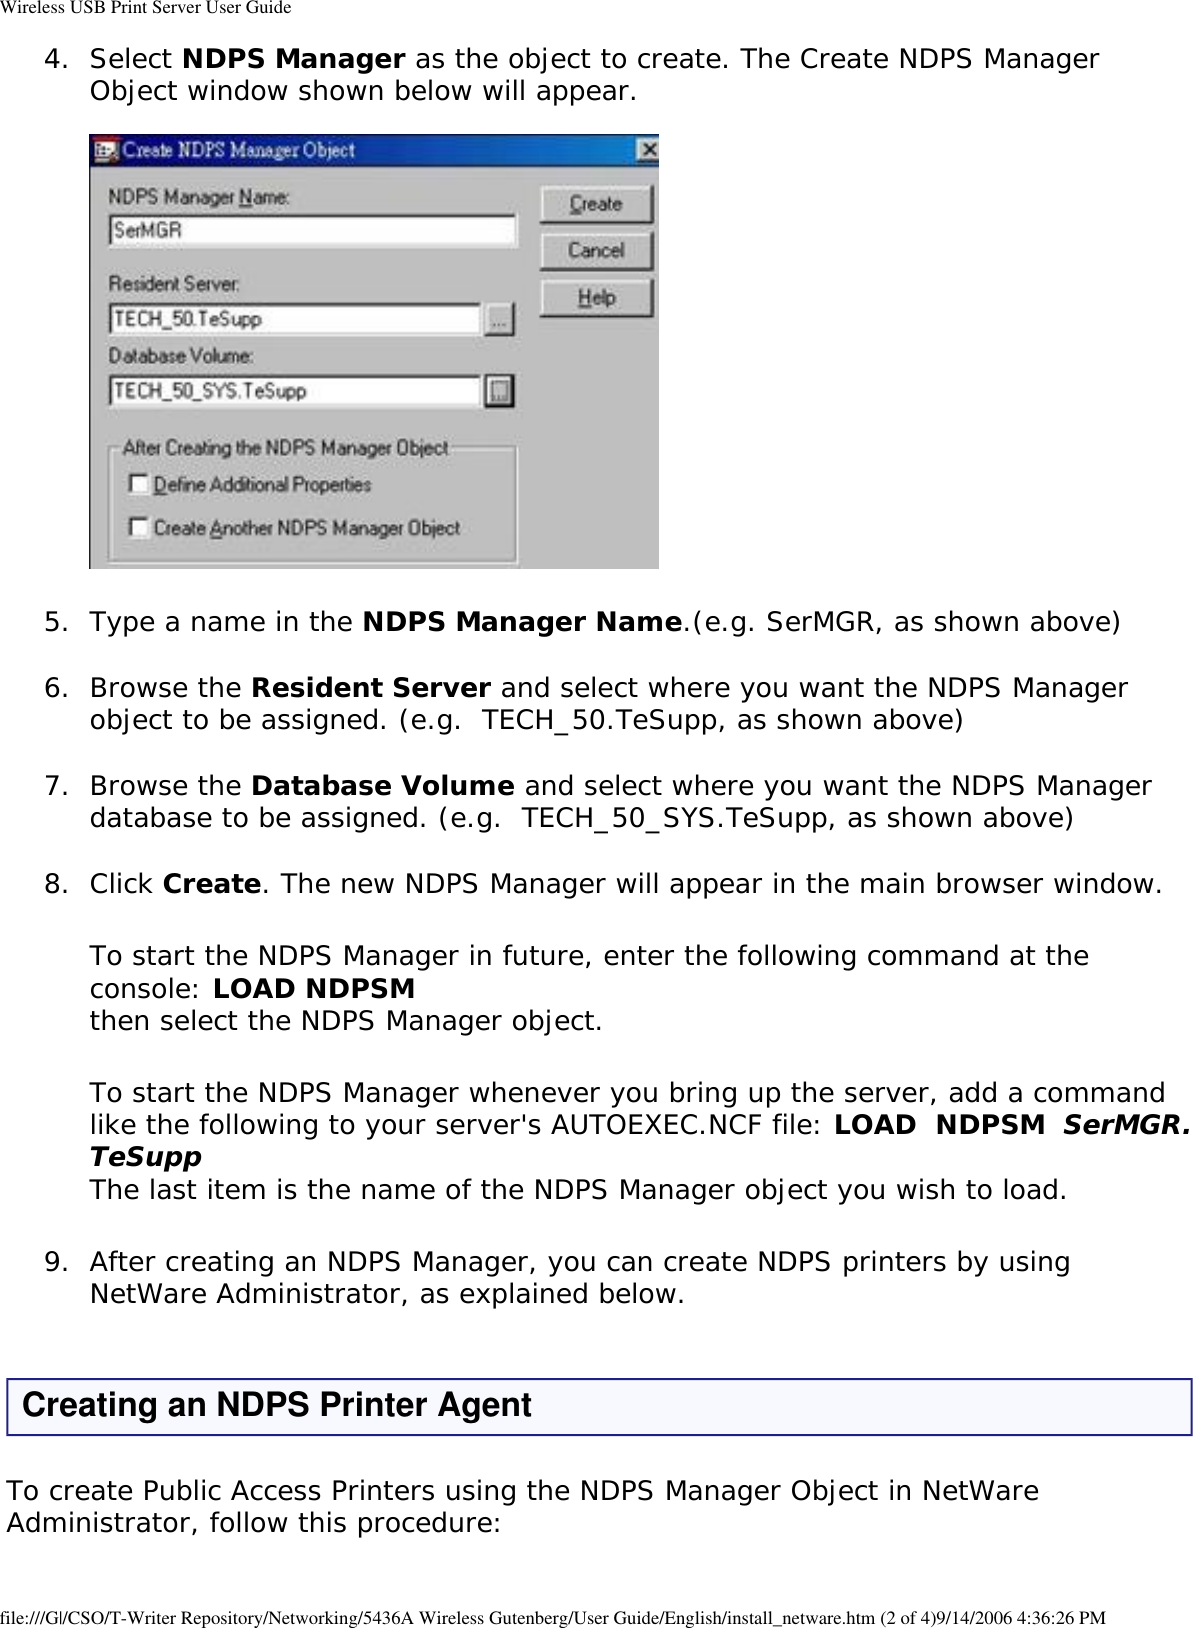 Wireless USB Print Server User Guide4.  Select NDPS Manager as the object to create. The Create NDPS Manager Object window shown below will appear.   5.  Type a name in the NDPS Manager Name.(e.g. SerMGR, as shown above) 6.  Browse the Resident Server and select where you want the NDPS Manager object to be assigned. (e.g.  TECH_50.TeSupp, as shown above) 7.  Browse the Database Volume and select where you want the NDPS Manager database to be assigned. (e.g.  TECH_50_SYS.TeSupp, as shown above) 8.  Click Create. The new NDPS Manager will appear in the main browser window. To start the NDPS Manager in future, enter the following command at the console: LOAD NDPSM then select the NDPS Manager object.To start the NDPS Manager whenever you bring up the server, add a command like the following to your server&apos;s AUTOEXEC.NCF file: LOAD  NDPSM  SerMGR.TeSupp The last item is the name of the NDPS Manager object you wish to load.9.  After creating an NDPS Manager, you can create NDPS printers by using NetWare Administrator, as explained below. Creating an NDPS Printer AgentTo create Public Access Printers using the NDPS Manager Object in NetWare Administrator, follow this procedure:file:///G|/CSO/T-Writer Repository/Networking/5436A Wireless Gutenberg/User Guide/English/install_netware.htm (2 of 4)9/14/2006 4:36:26 PM